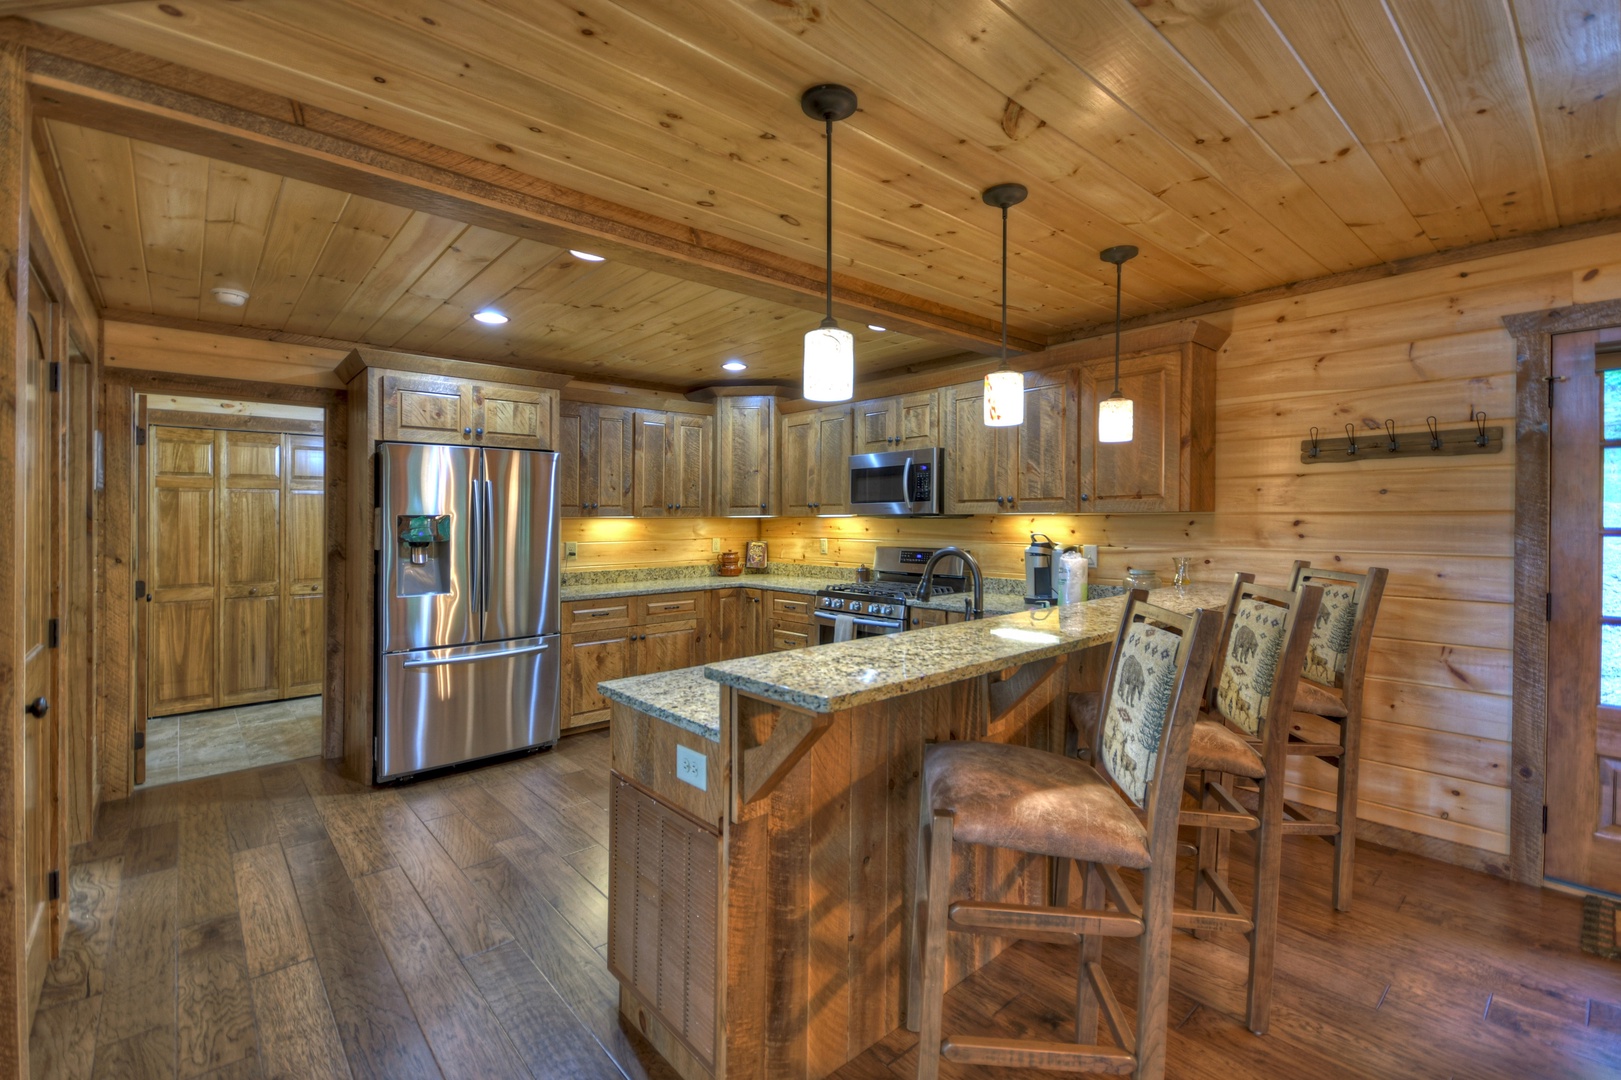 Deer Trails Cabin - Fully Equipped Kitchen with Breakfast Bar